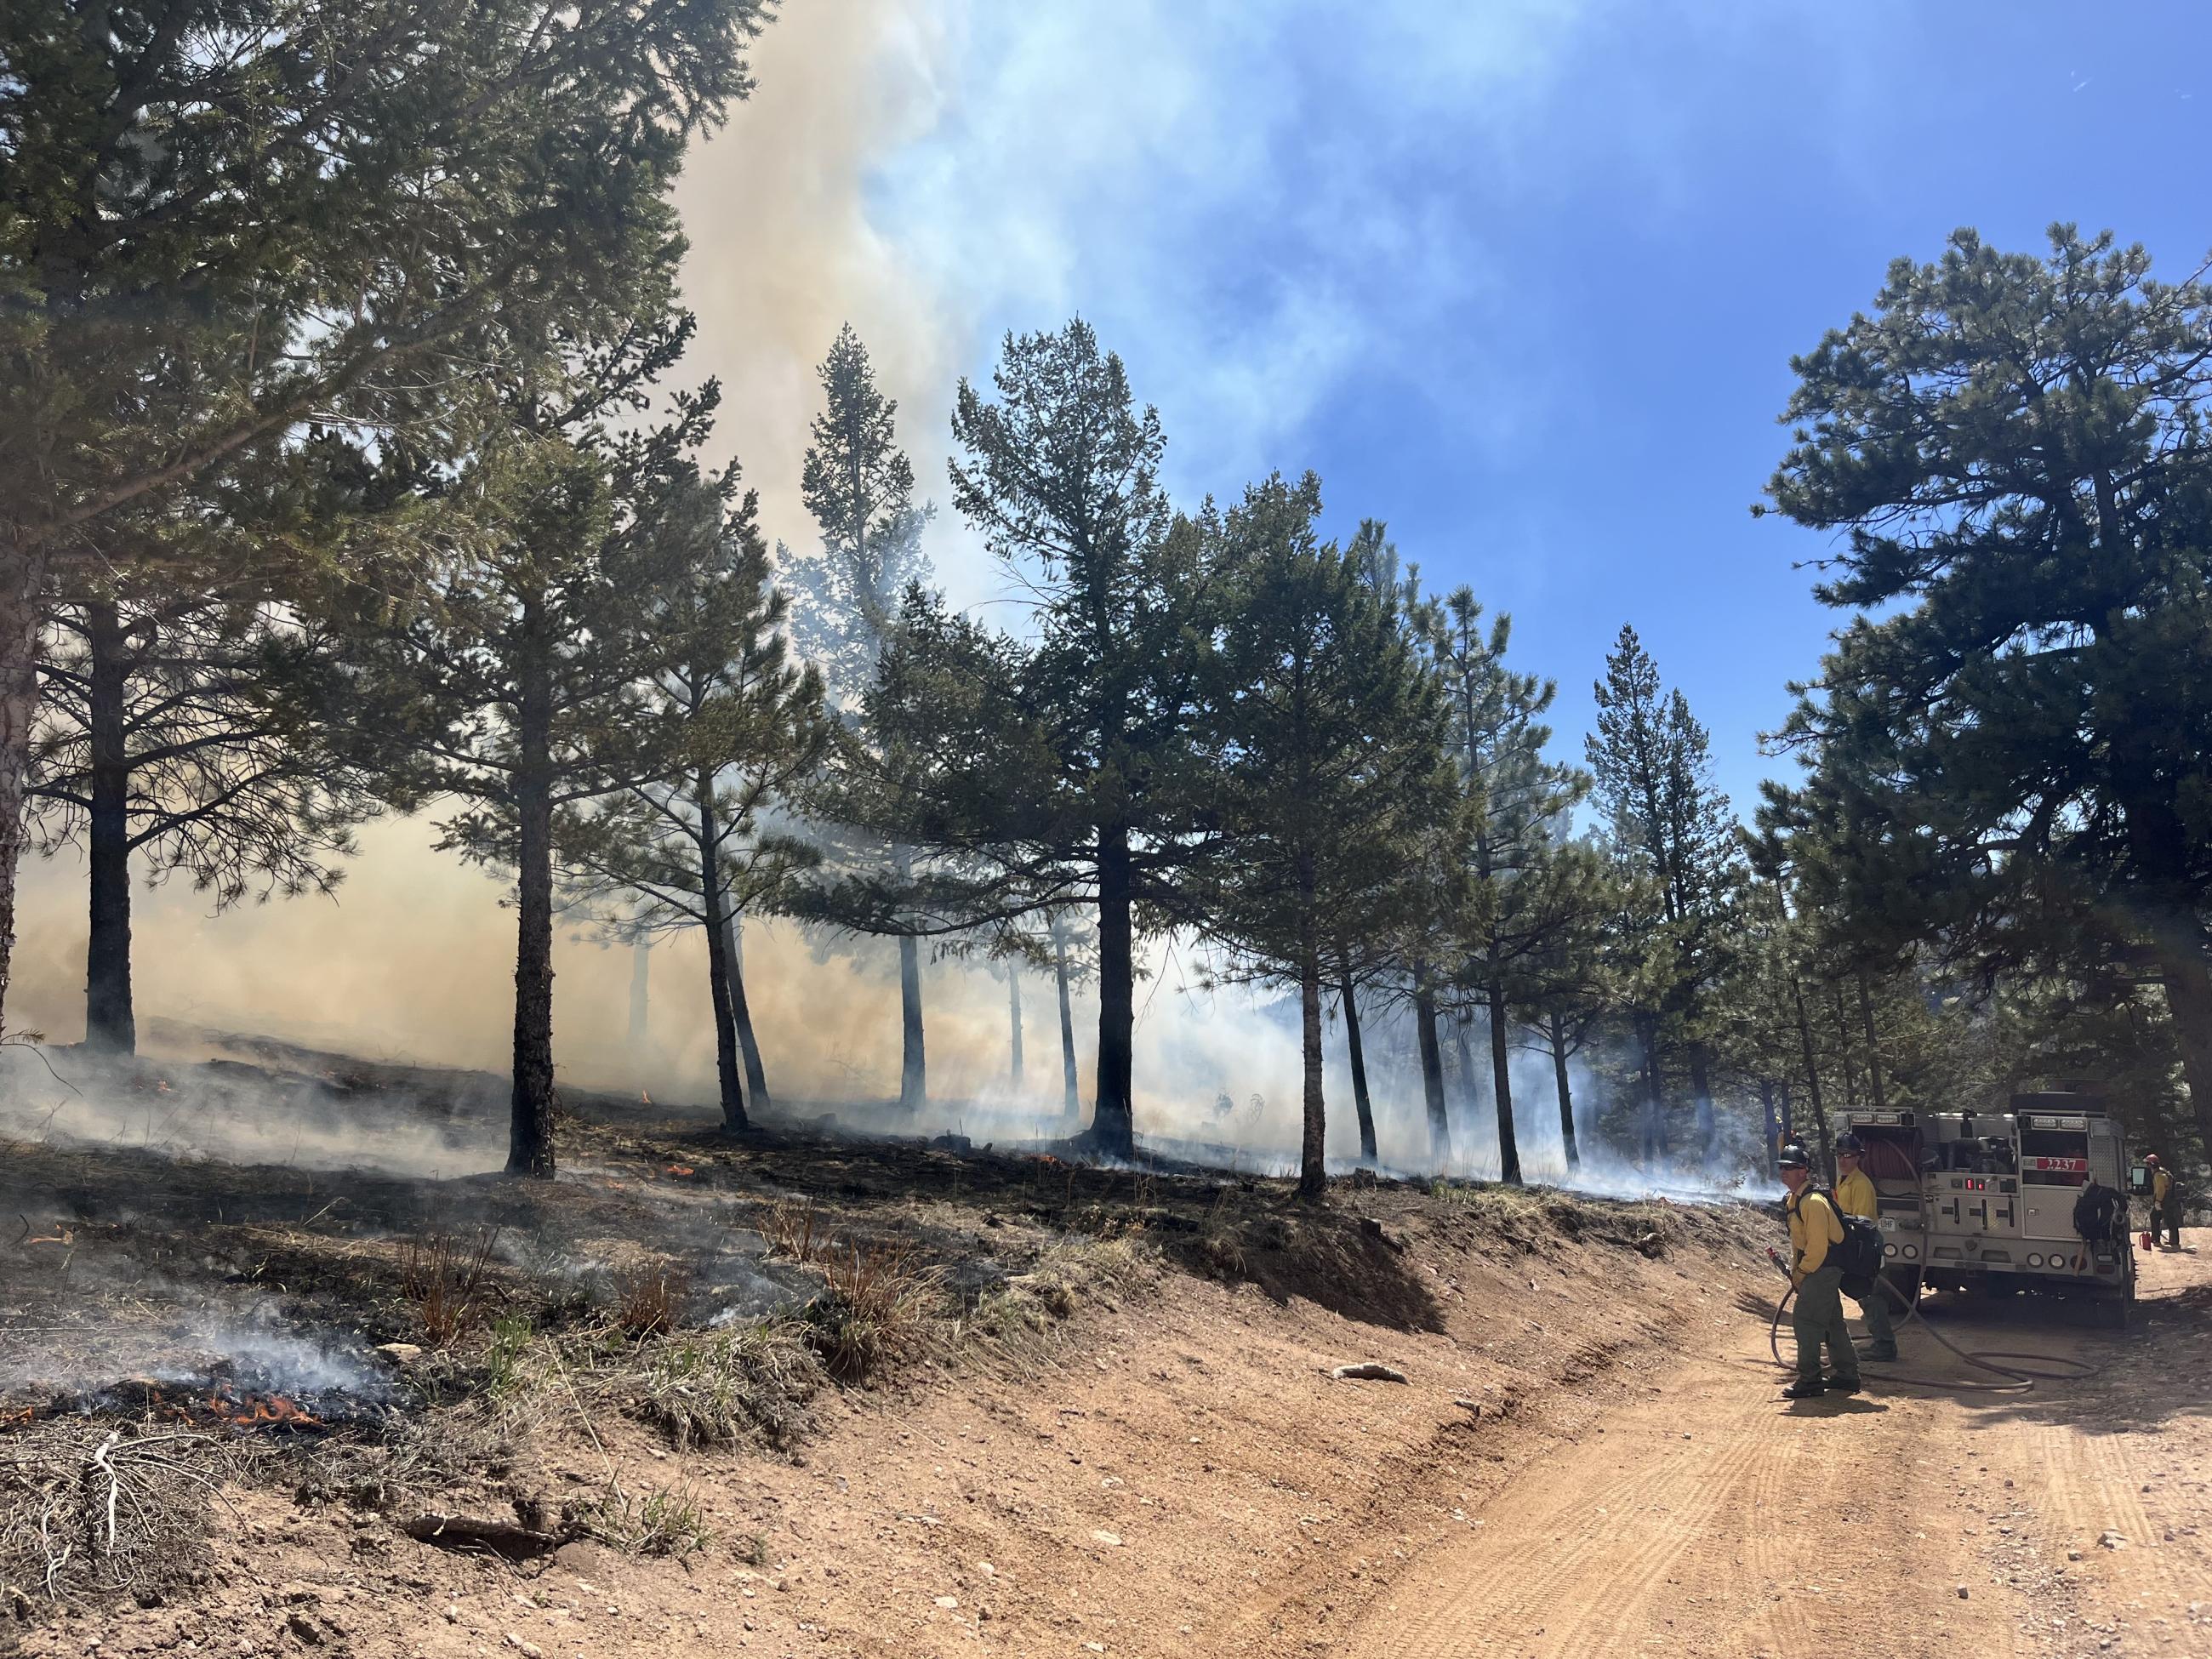 A fire truck works along the road with smoke uphill during the Forsythe II prescribed fire.